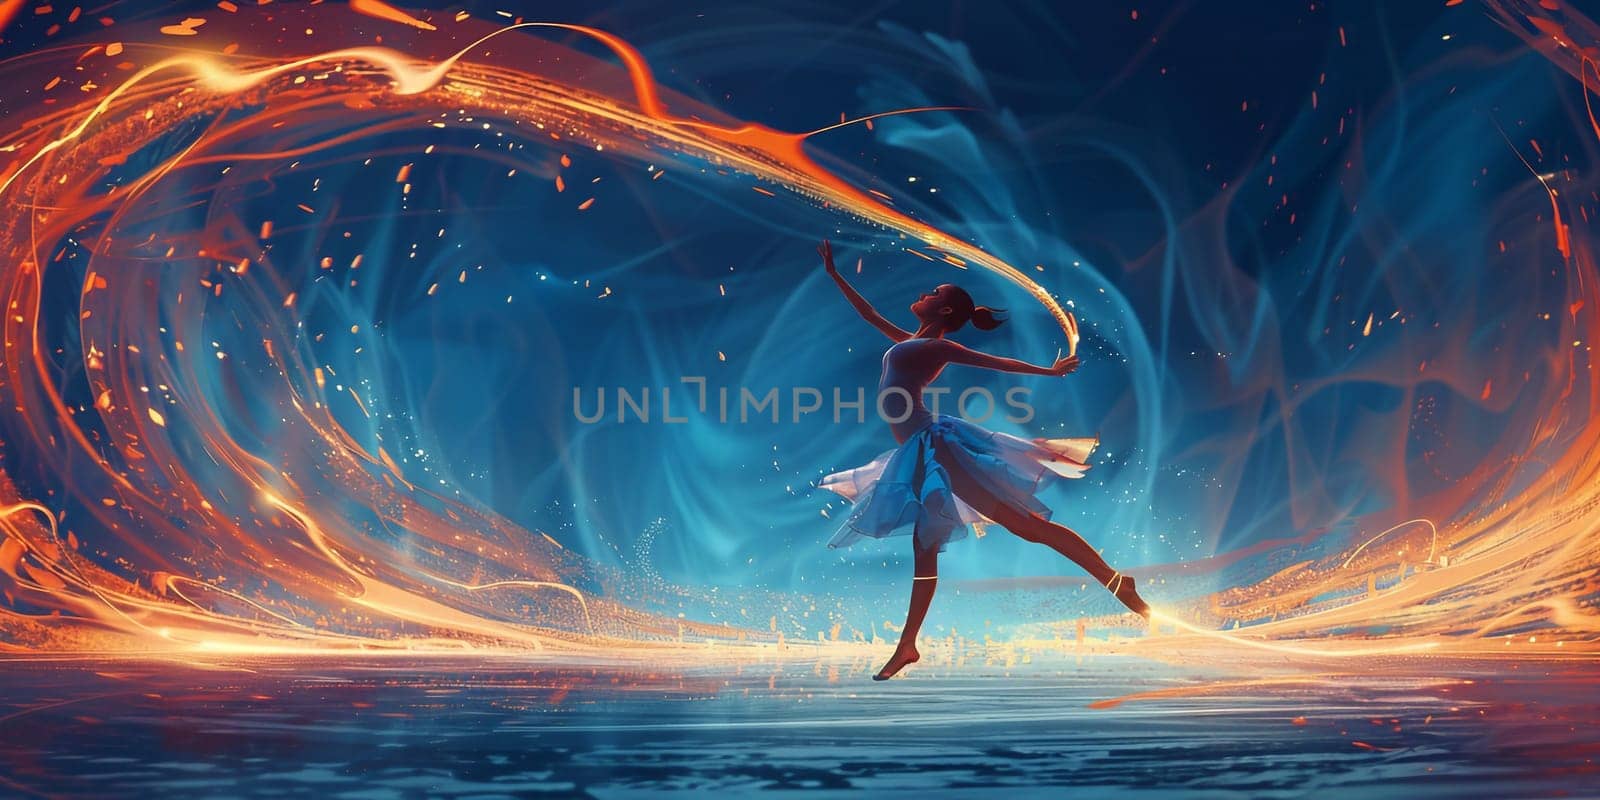 Portrait of a young ballerina on pointe shoes in a white tutu against background of bright neon lights. A young graceful ballet dancer in graceful pose. Silhouette. Ballet school poster. by Andelov13